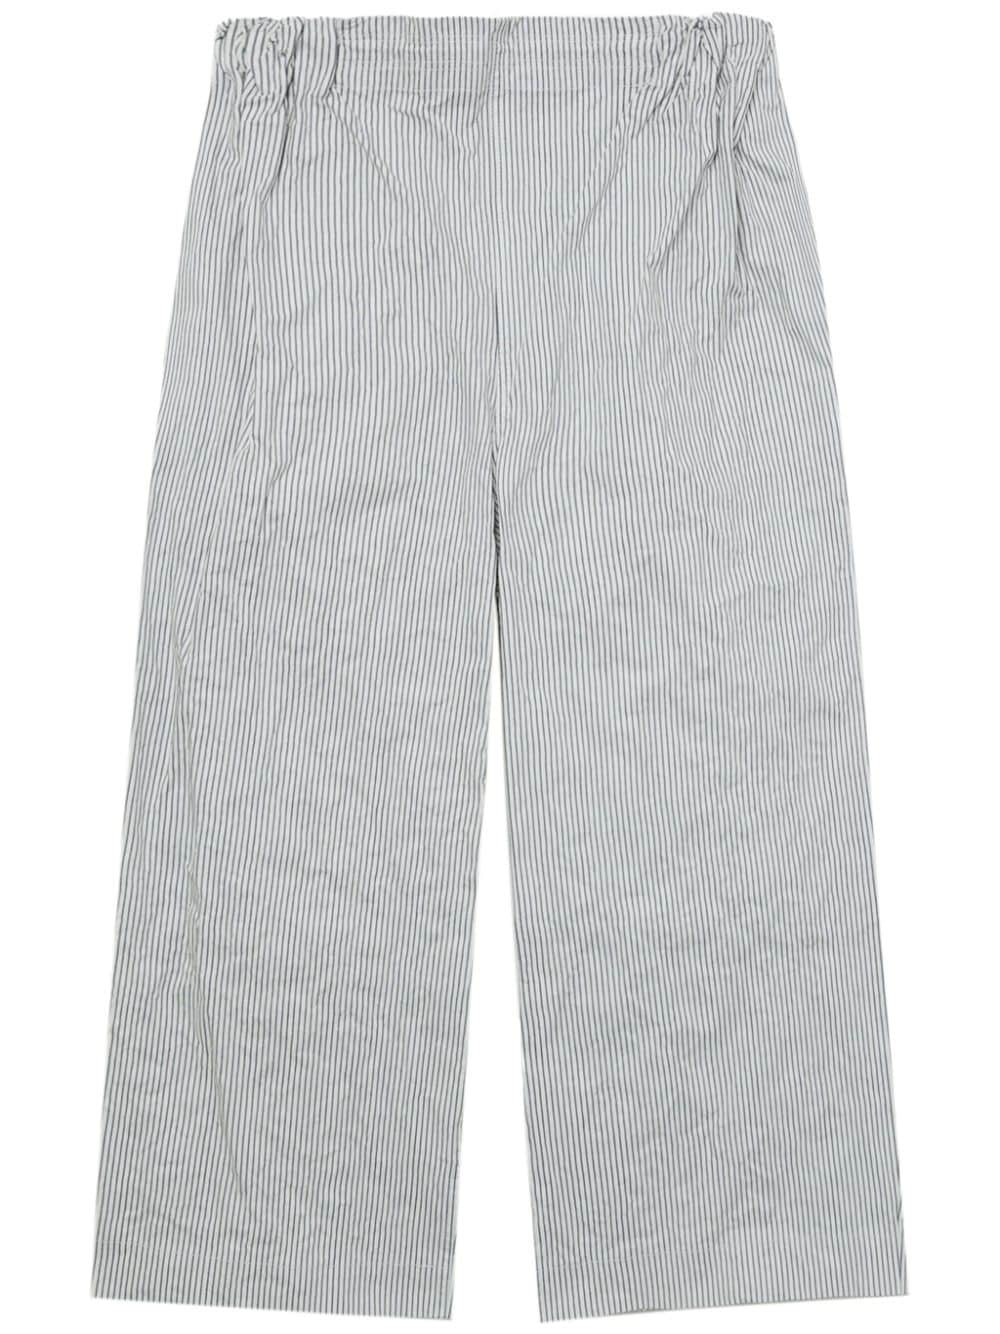 Hed Mayner striped cotton trousers - Grey von Hed Mayner